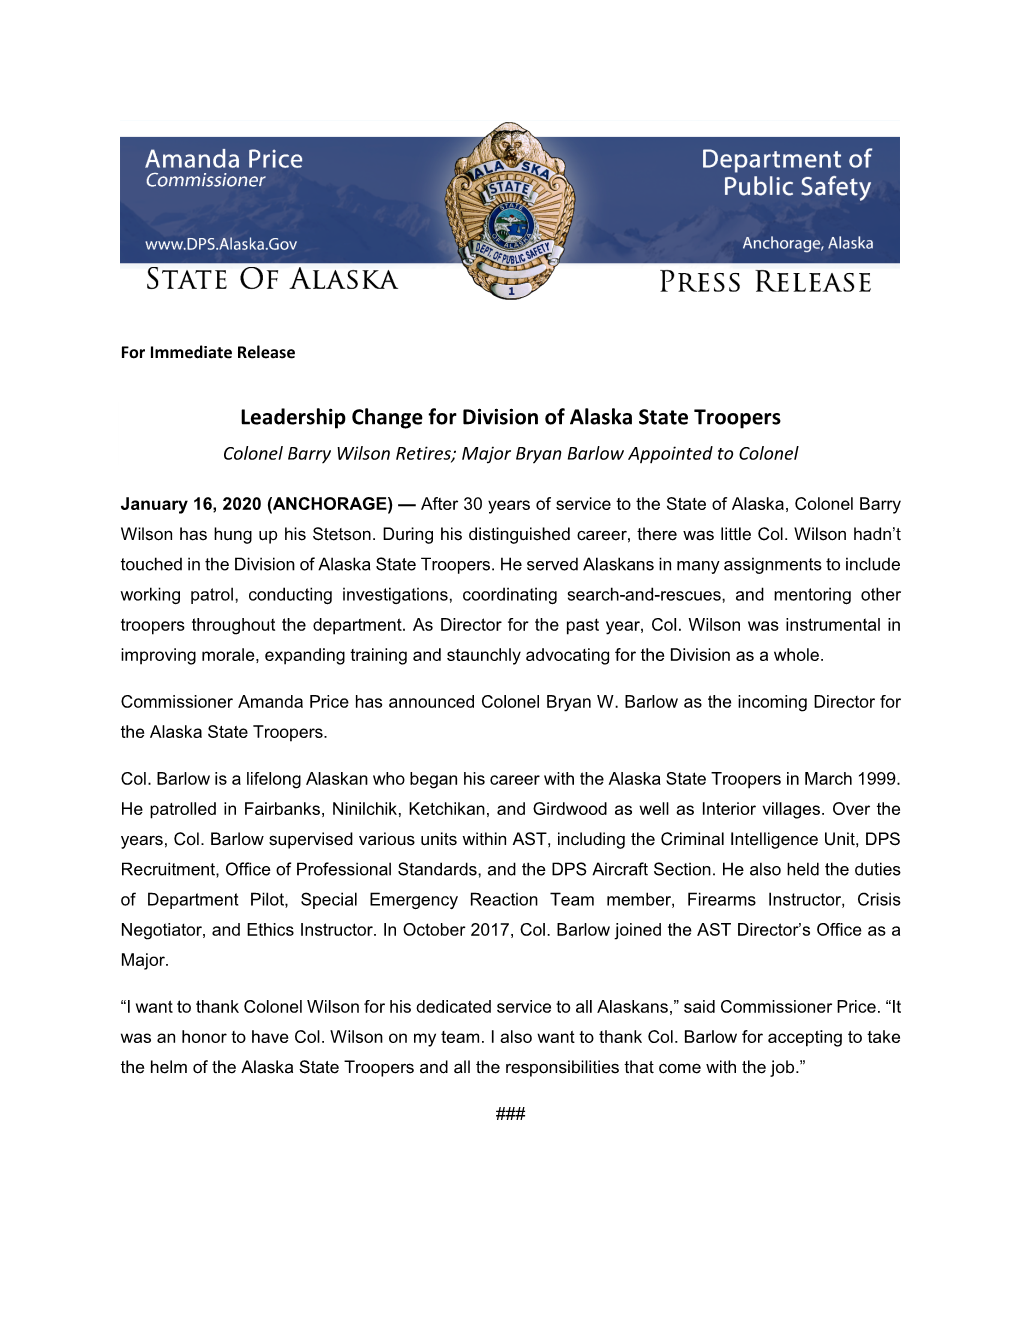 Leadership Change for Division of Alaska State Troopers Colonel Barry Wilson Retires; Major Bryan Barlow Appointed to Colonel